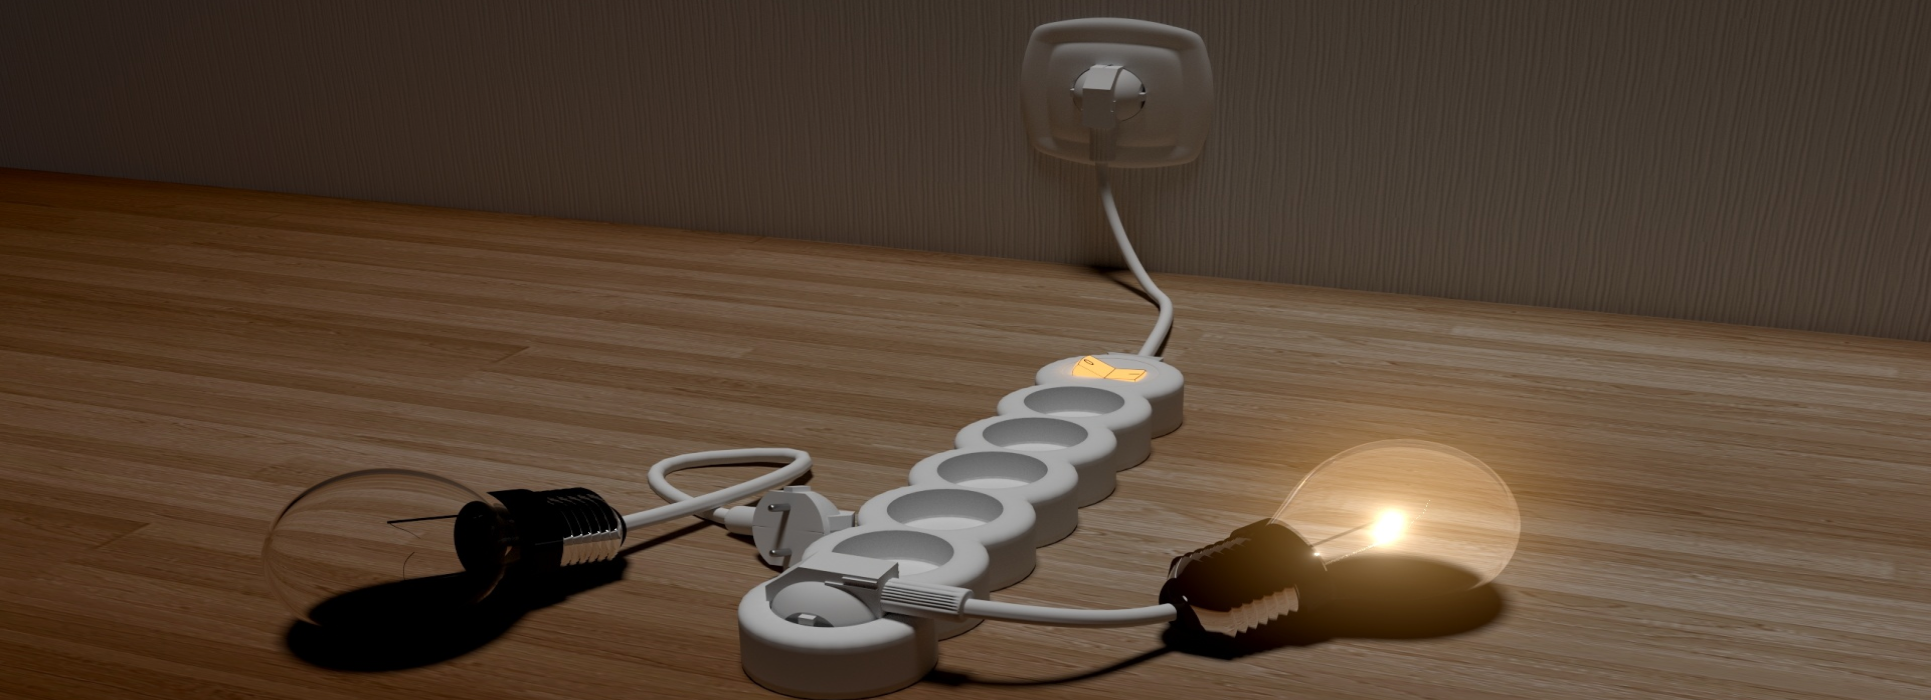 Top 10 Best Smart Plugs for Home in 2023